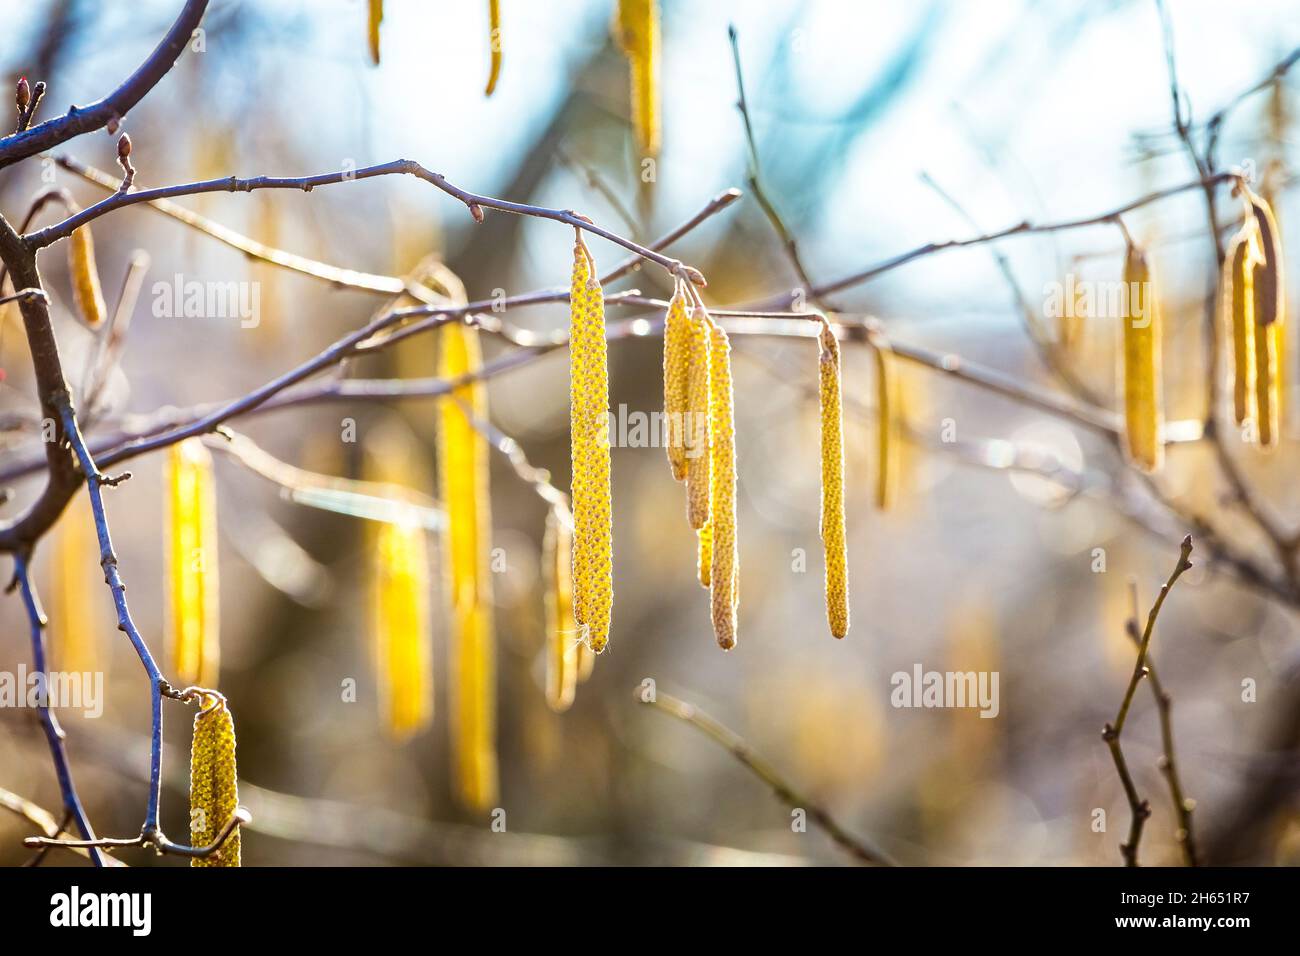 Spring flowers male catkins of Common hazel Corylus avellana similar to earrings and small red female flowers on tree branch in sunlight, spring backg Stock Photo